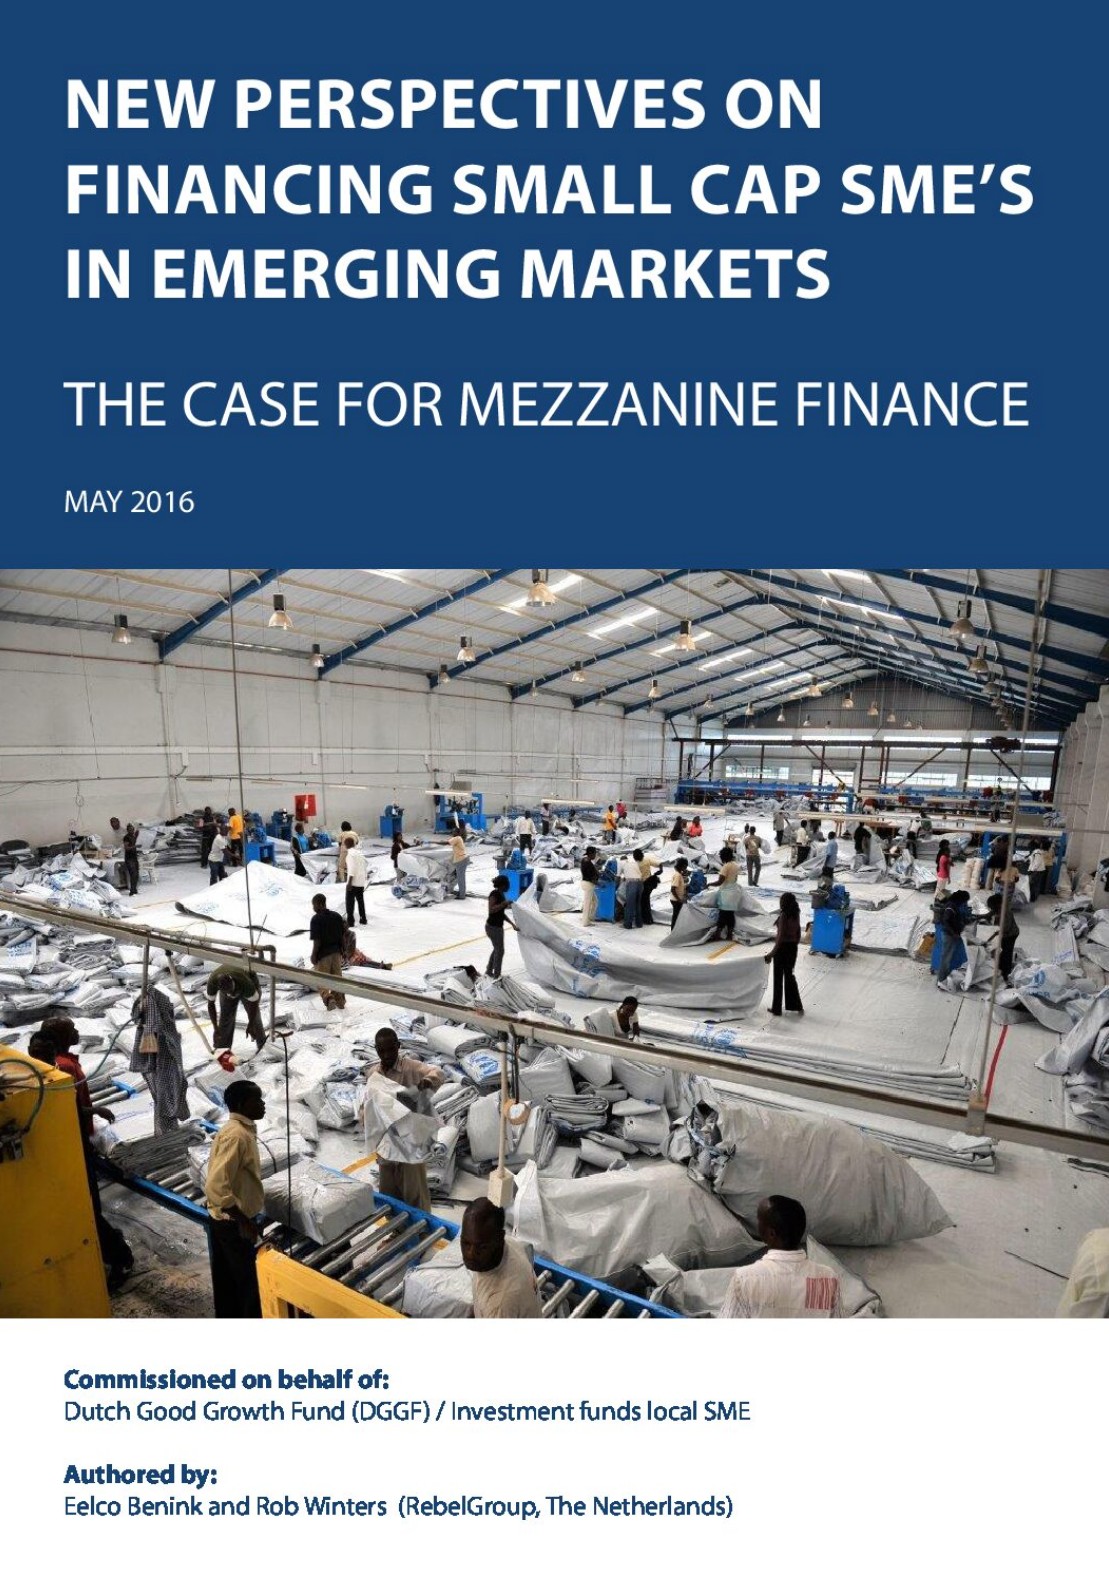 New Perspectives On Financing Small Cap SME's In Emerging Markets pdf - Iungo capital downloads